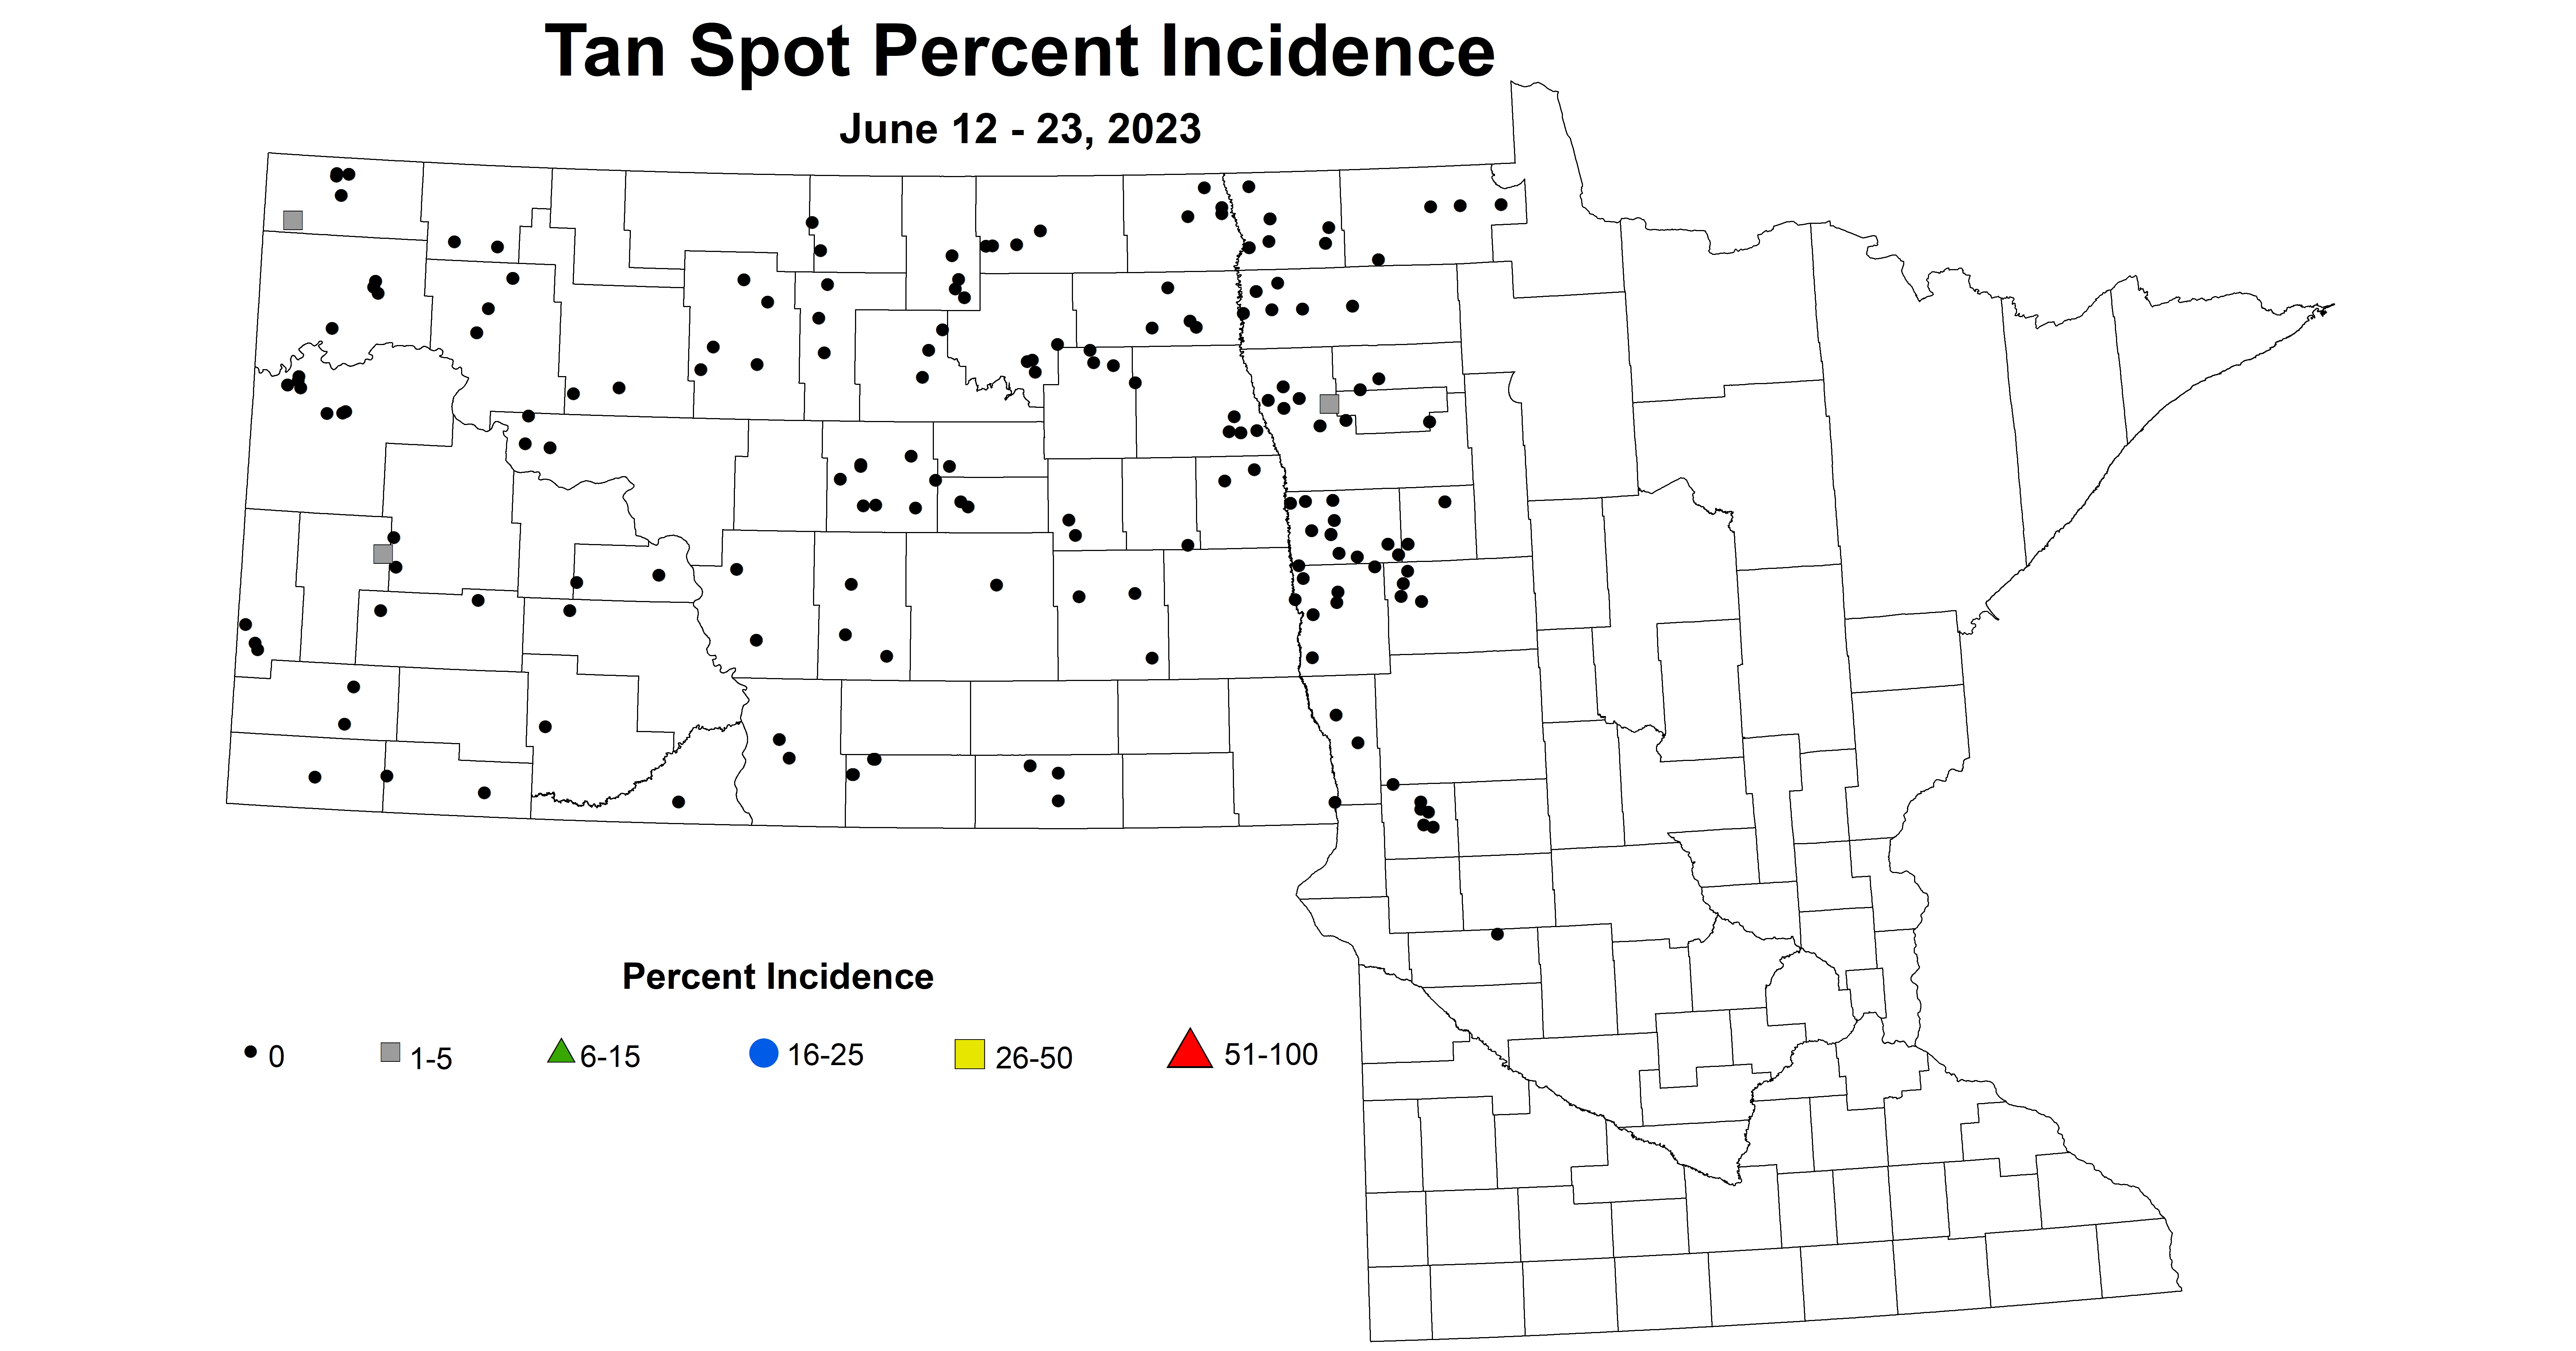 wheat tan spot incidence June 12-23 2023 updated